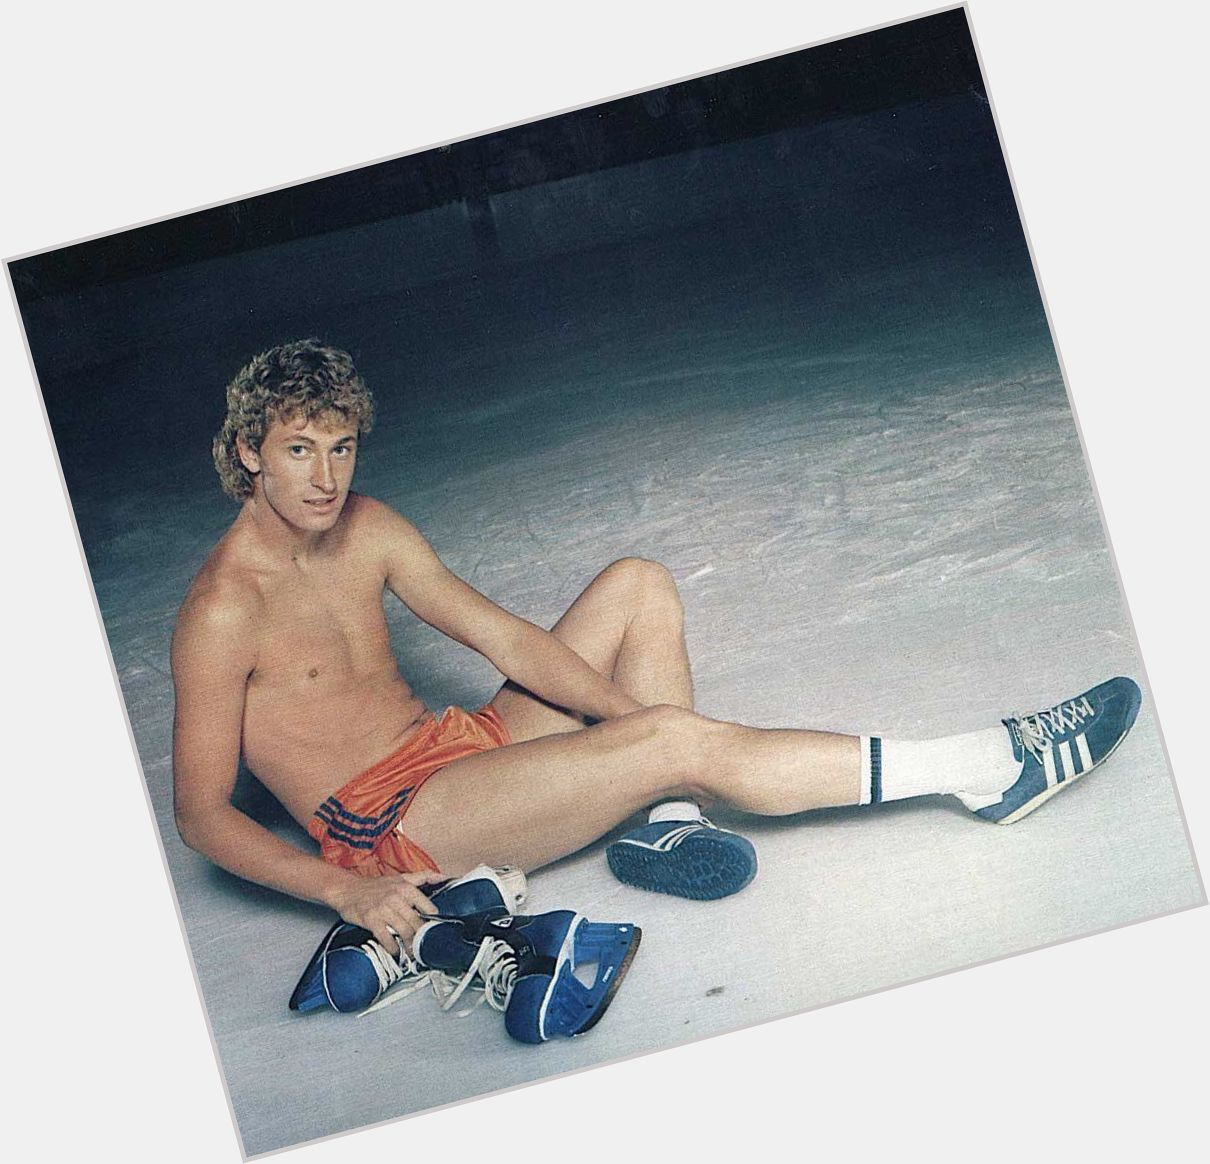 Happy birthday to the GOAT, the legend, the Great One.... Wayne Gretzky 